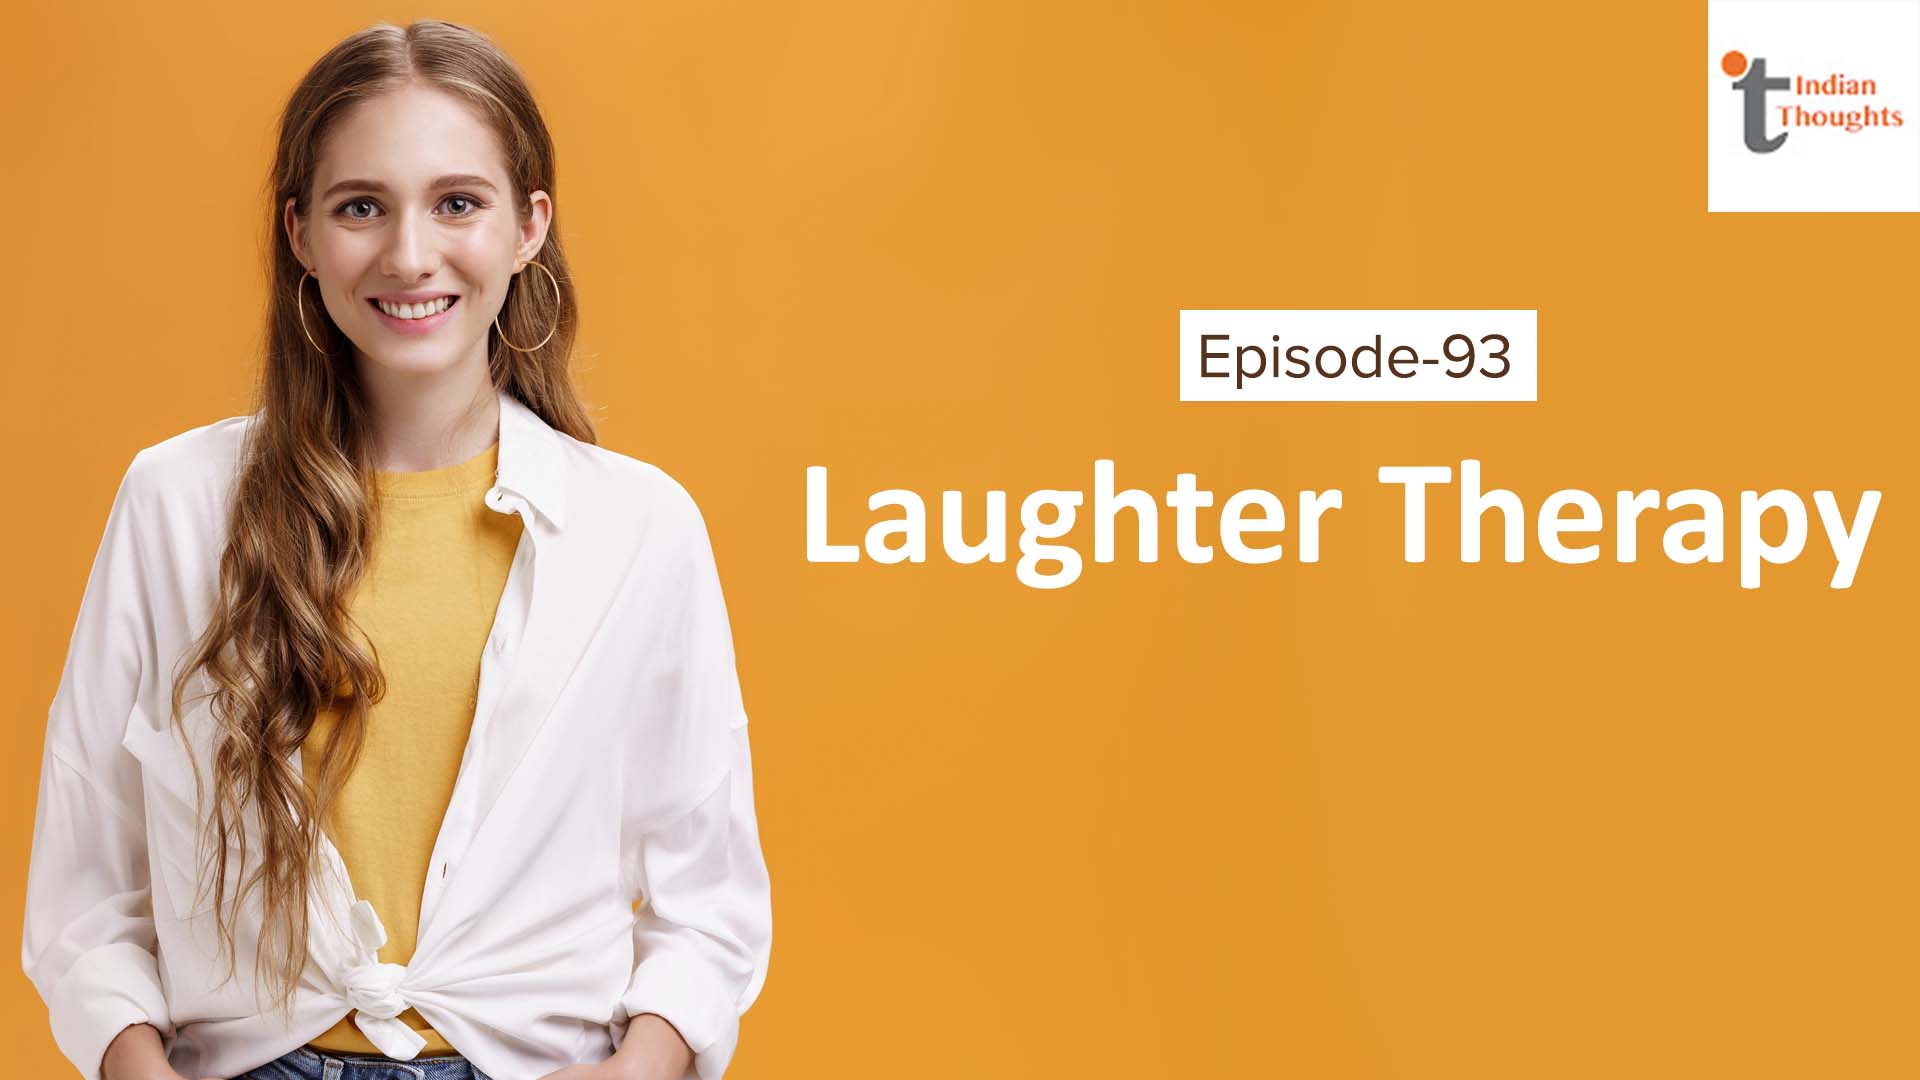 Laughter therapy